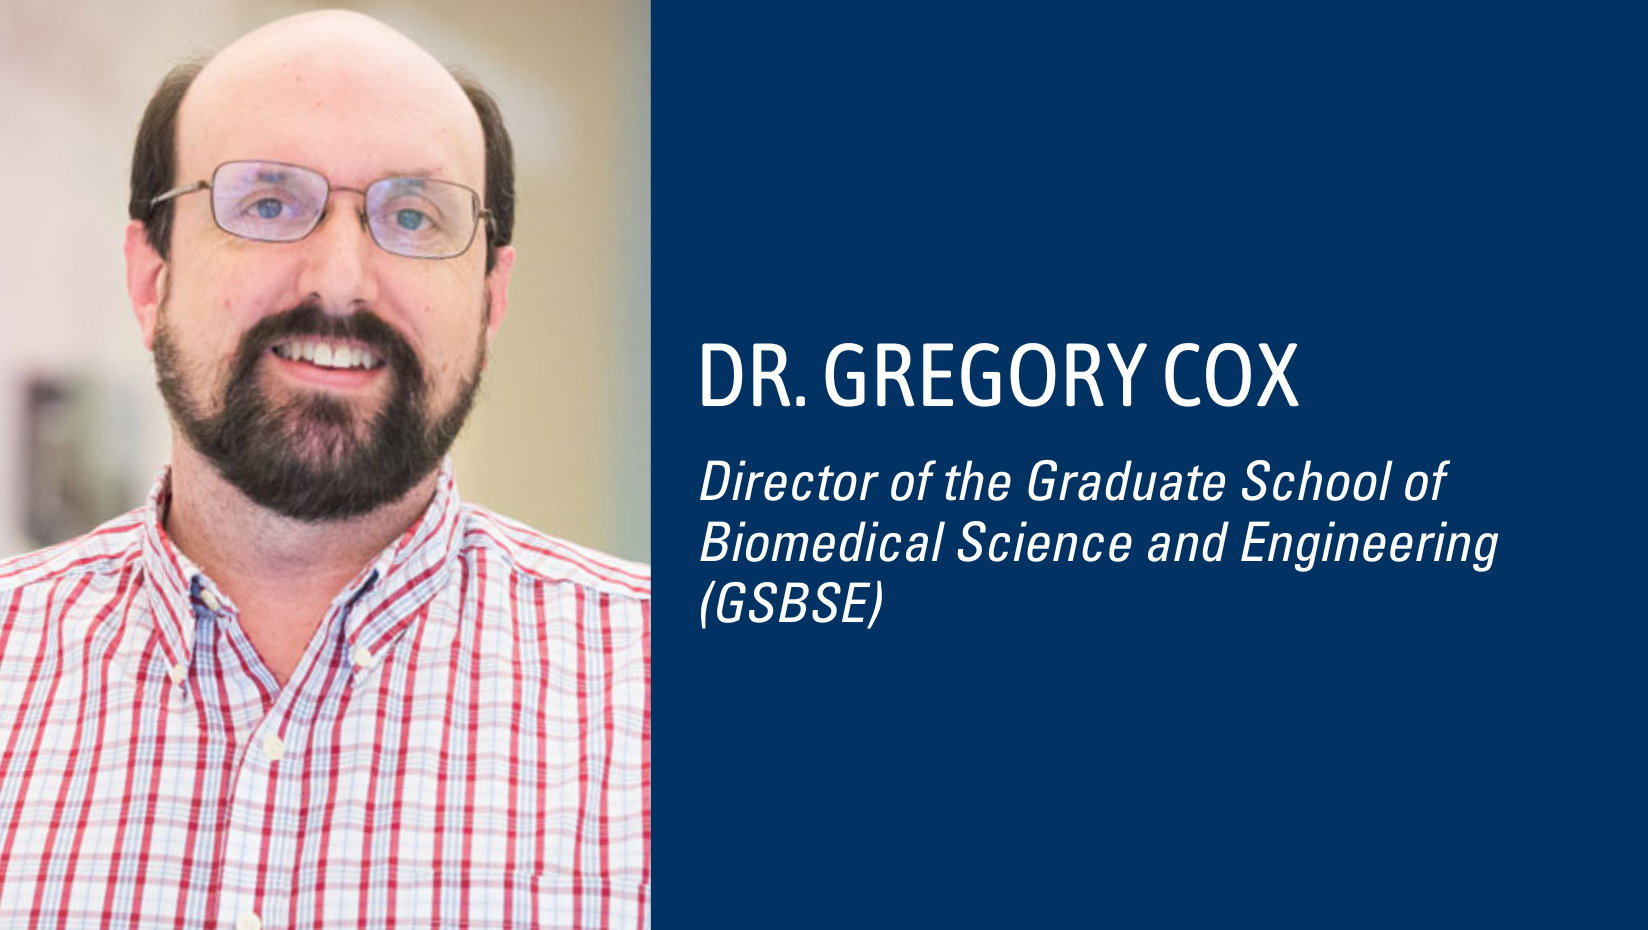 Portrait of Dr. Gregory Cox. Text reads Dr. Gregory Cox, Director of the Graduate School of Biomedical Science and Engineering (GSBSE)